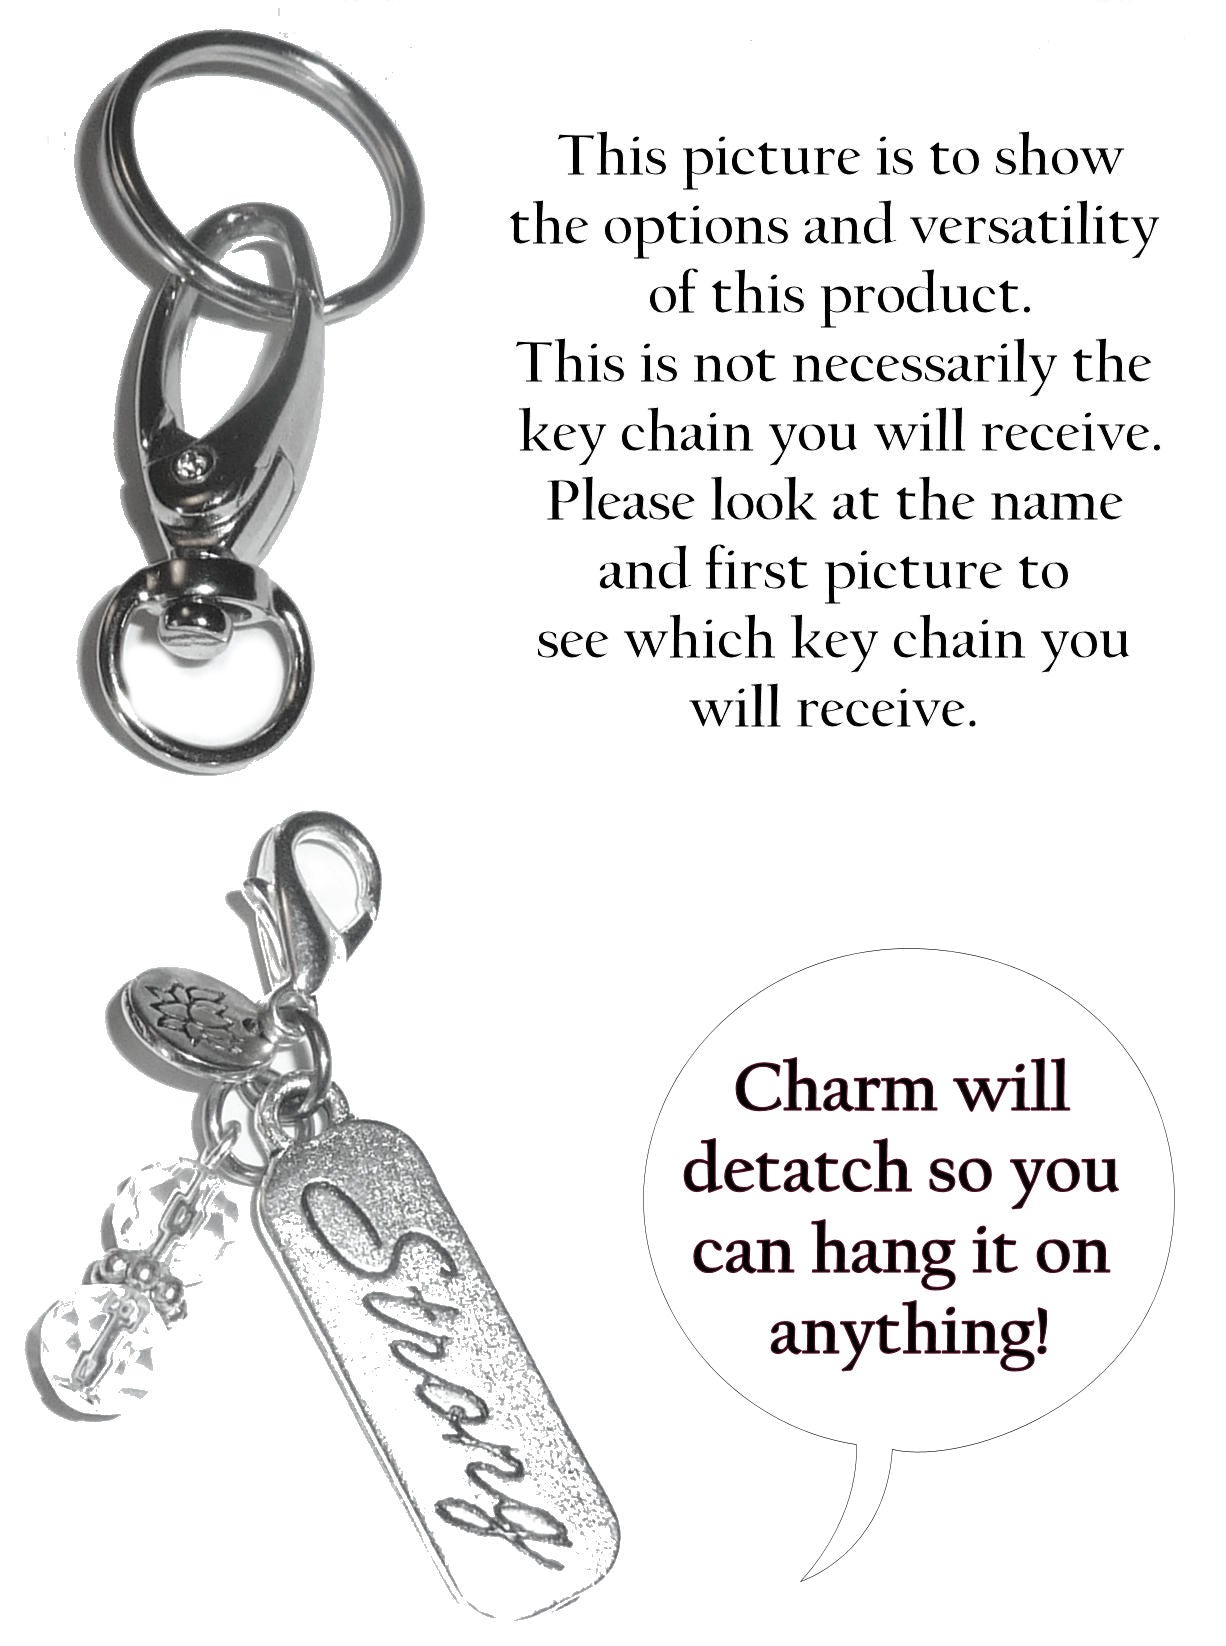 (I Love Football) Charm Key Chain Ring, Women's Purse or Necklace Charm, Comes in a Gift Box!